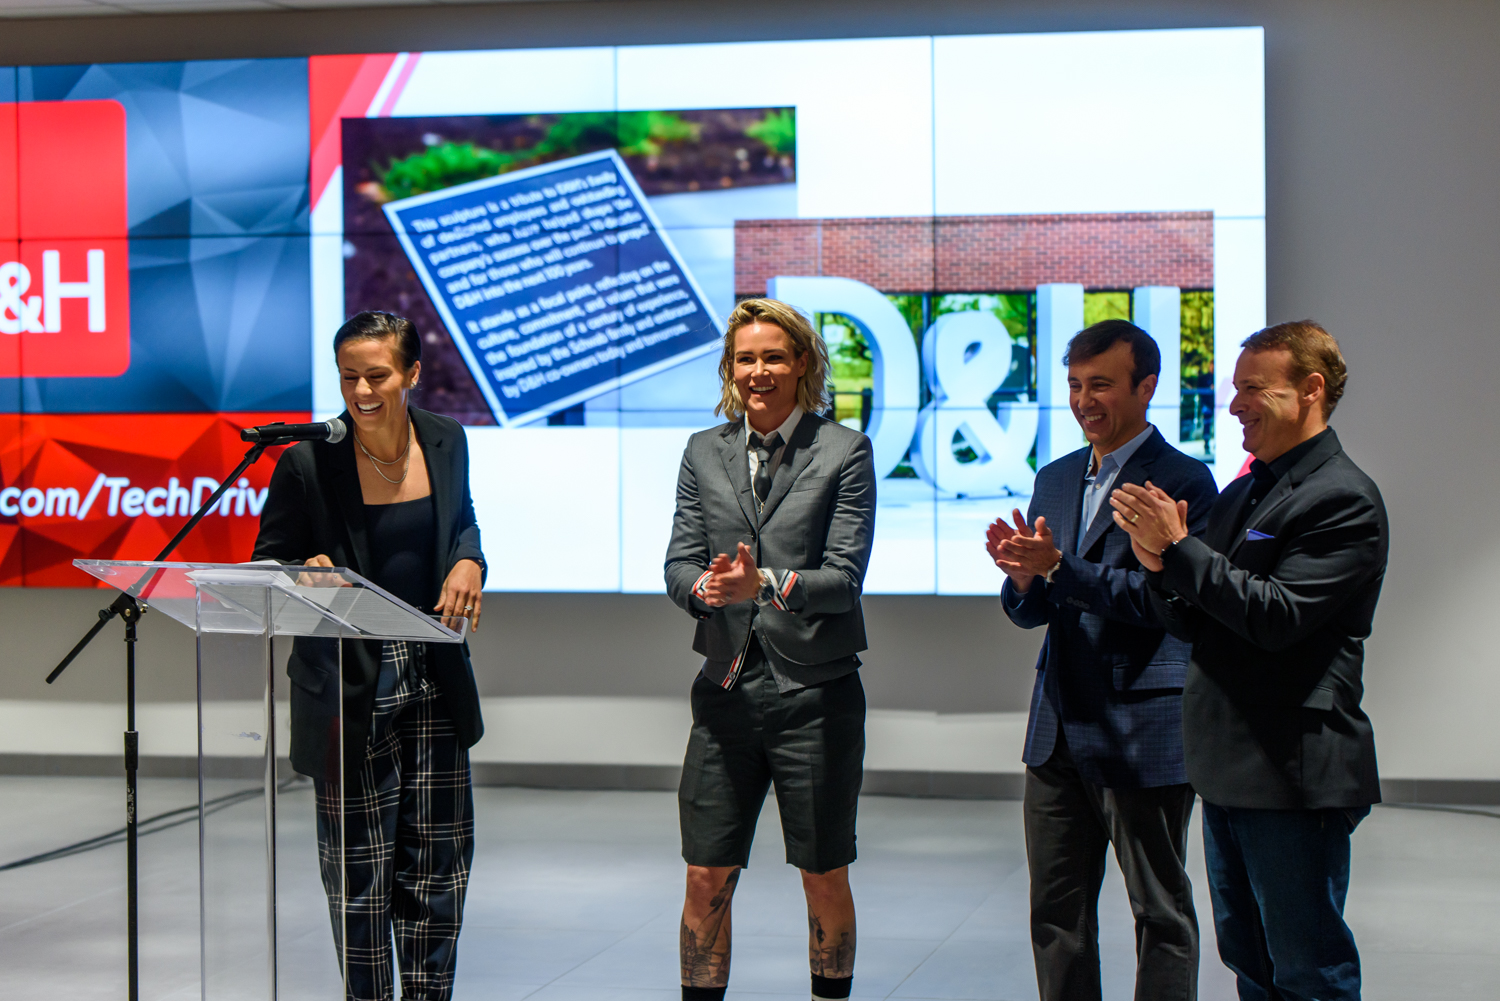 Special Guests Ali Krieger and Ashlyn Harris of the United States Women's National Soccer Team share a few words at D&H's new headquarters official opening ceremony and dedication